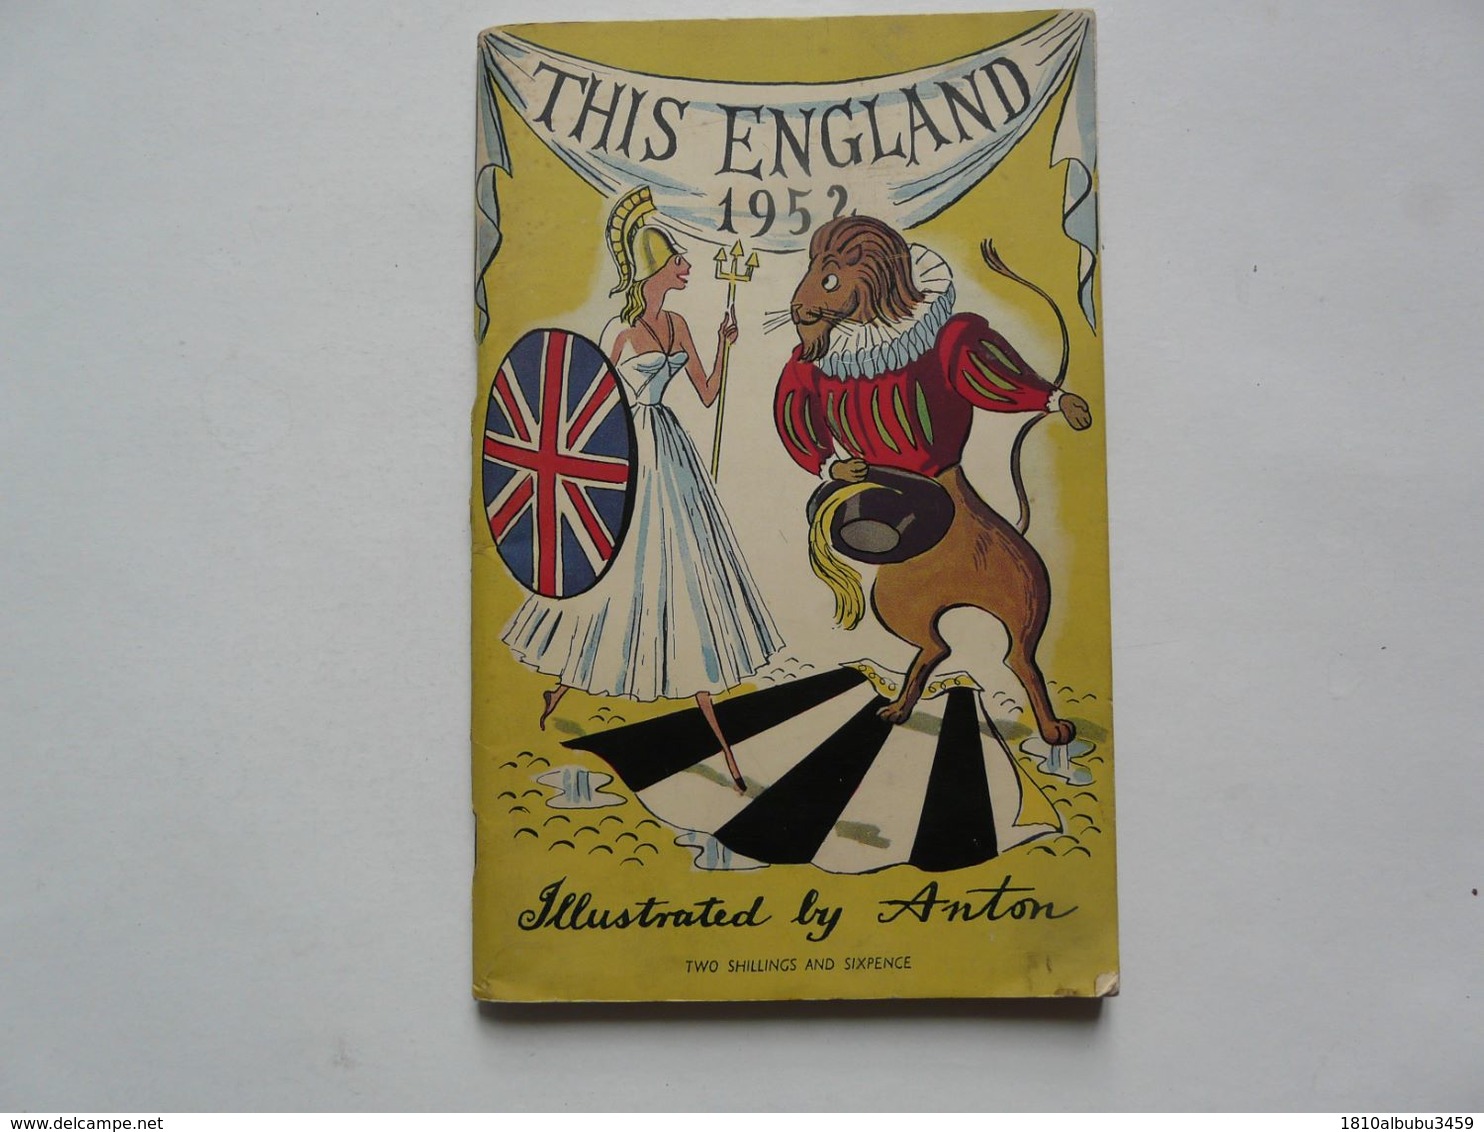 THIS ENGLAND 1952 - ILLUSTRATED BY ANTON - Cultura